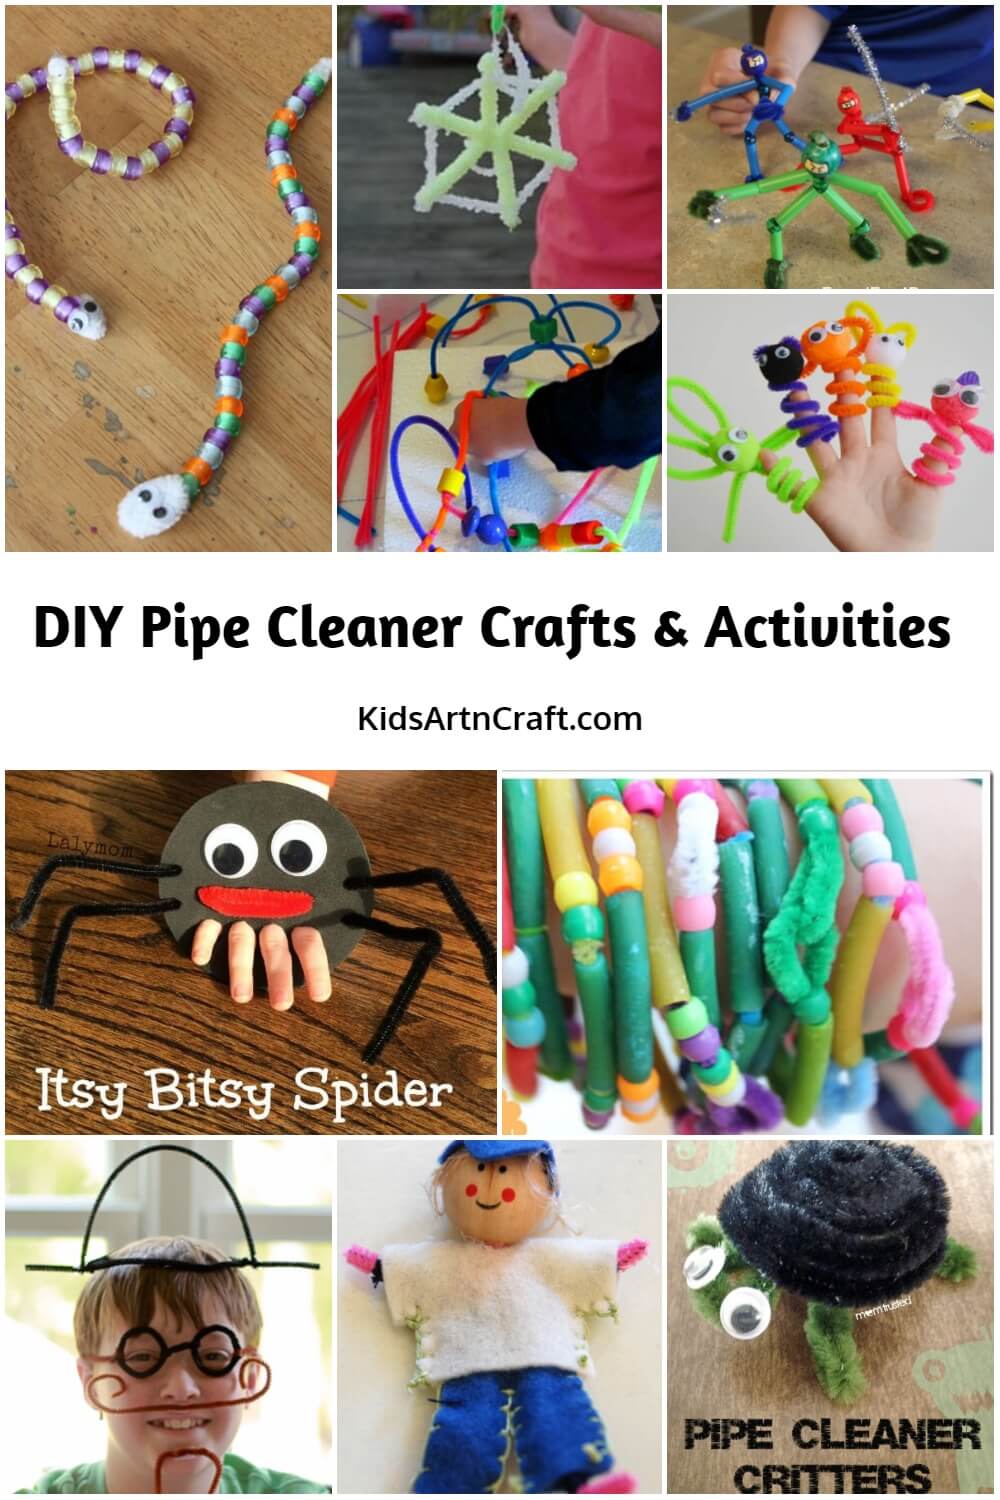 DIY Pipe Cleaner Craft & Activities For Kids